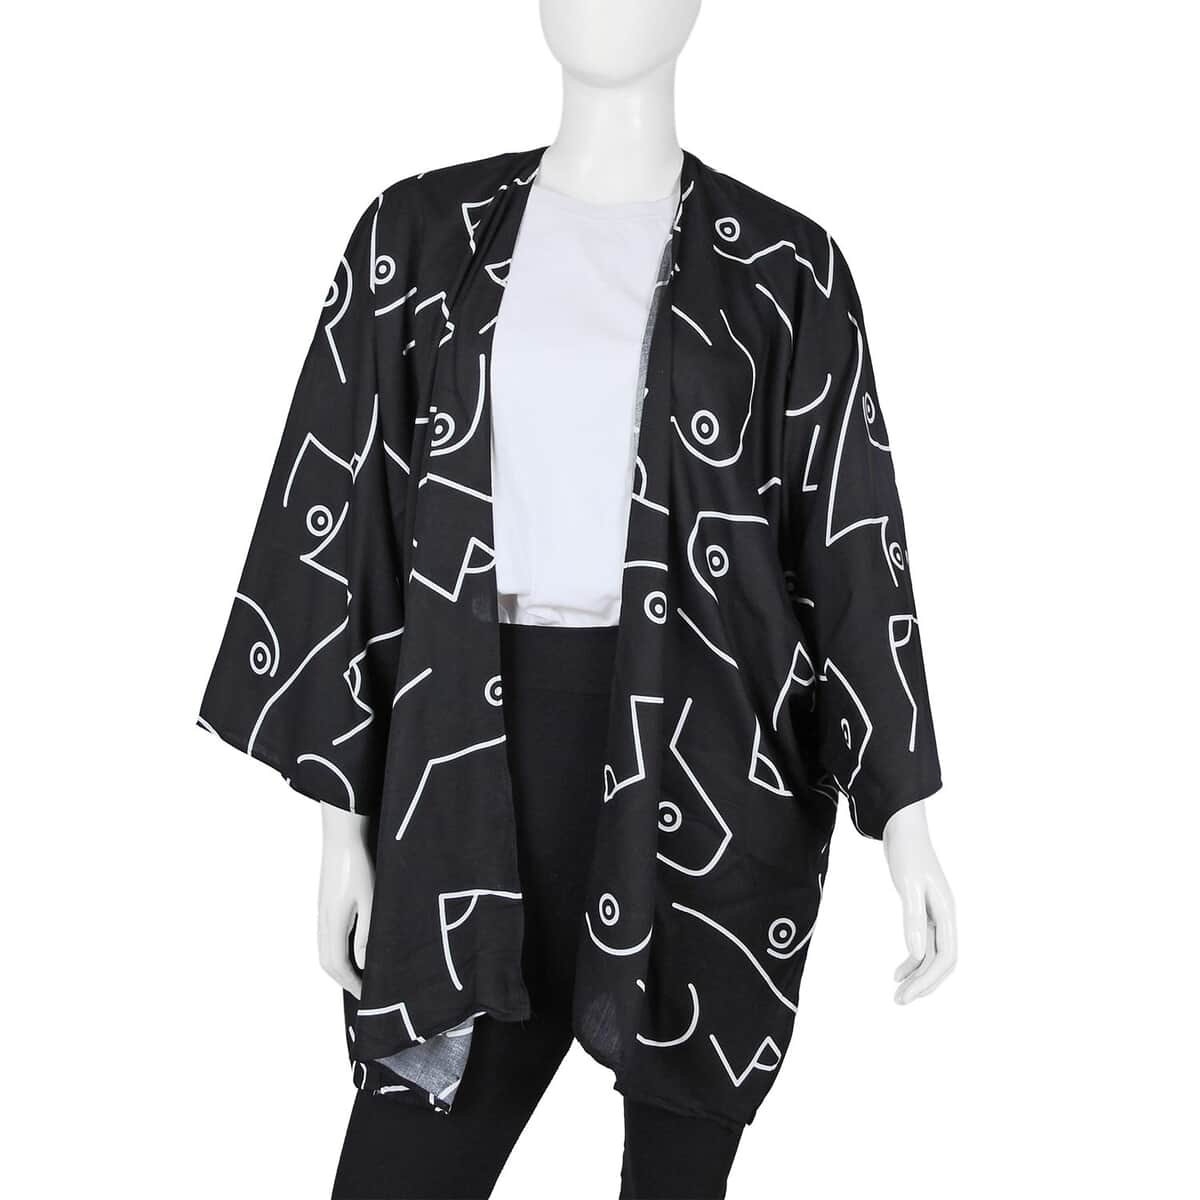 Tamsy Black Abstract Pattern 100% Cotton Kimono - One Size Fits Most image number 0